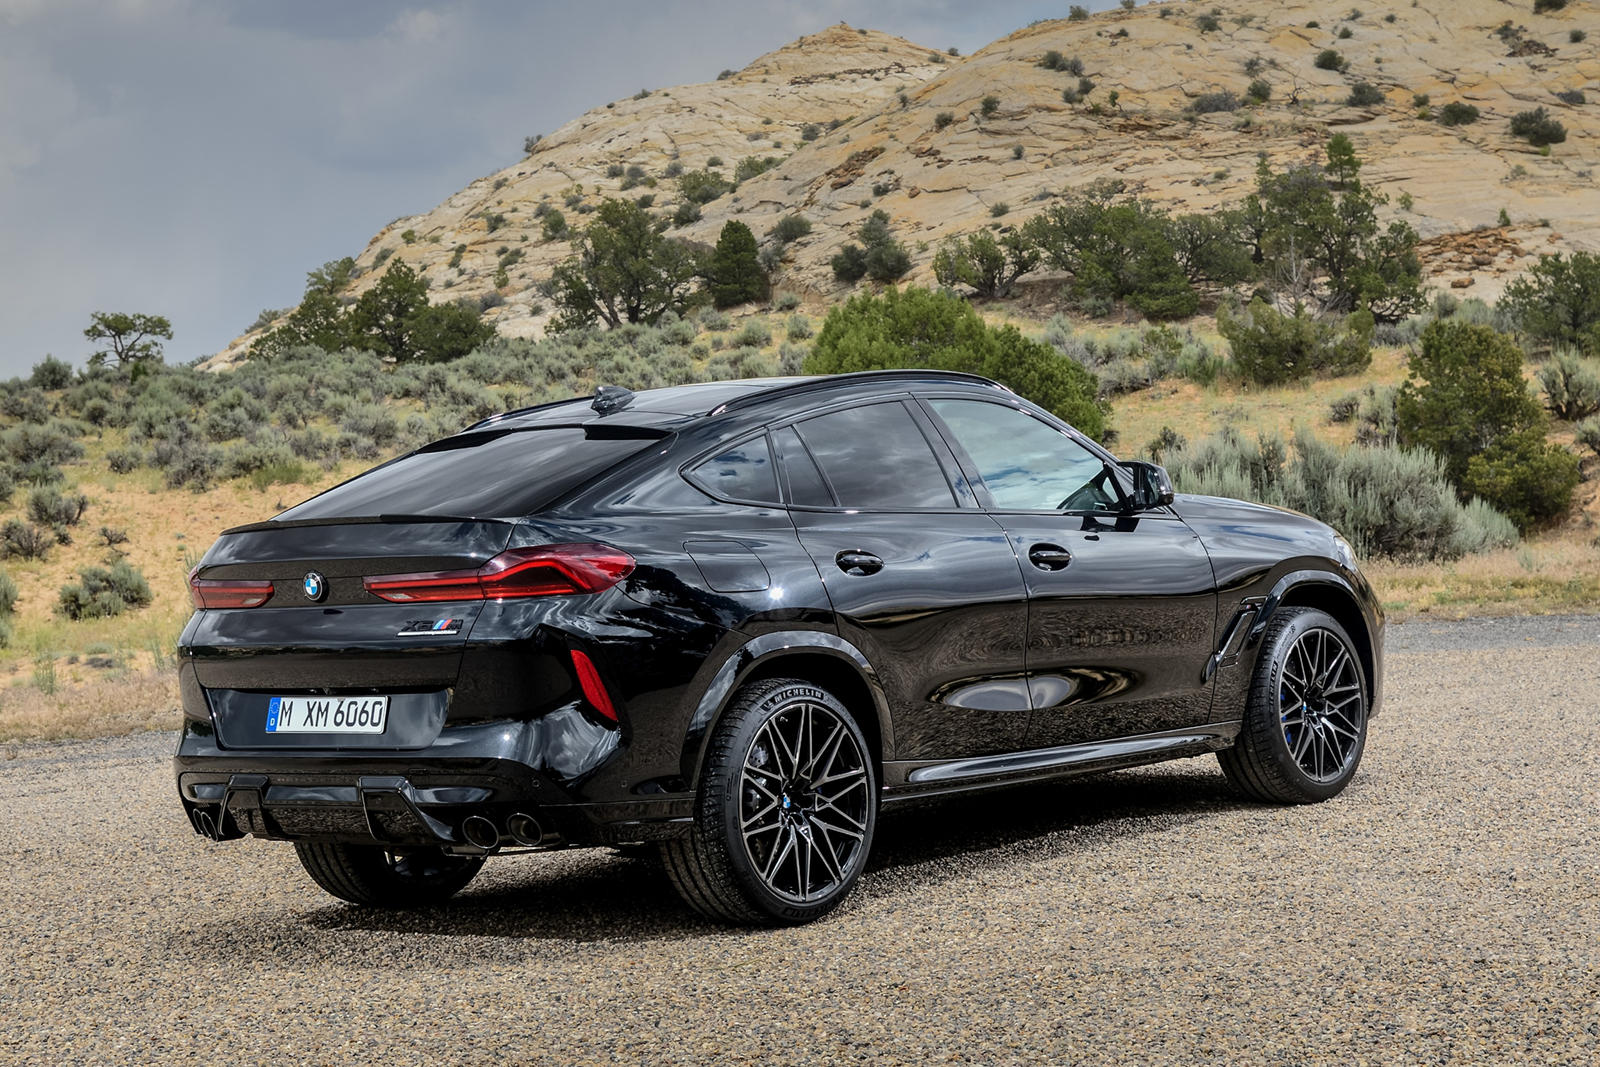 2021 BMW X6 M: Review, Trims, Specs, Price, New Interior Features